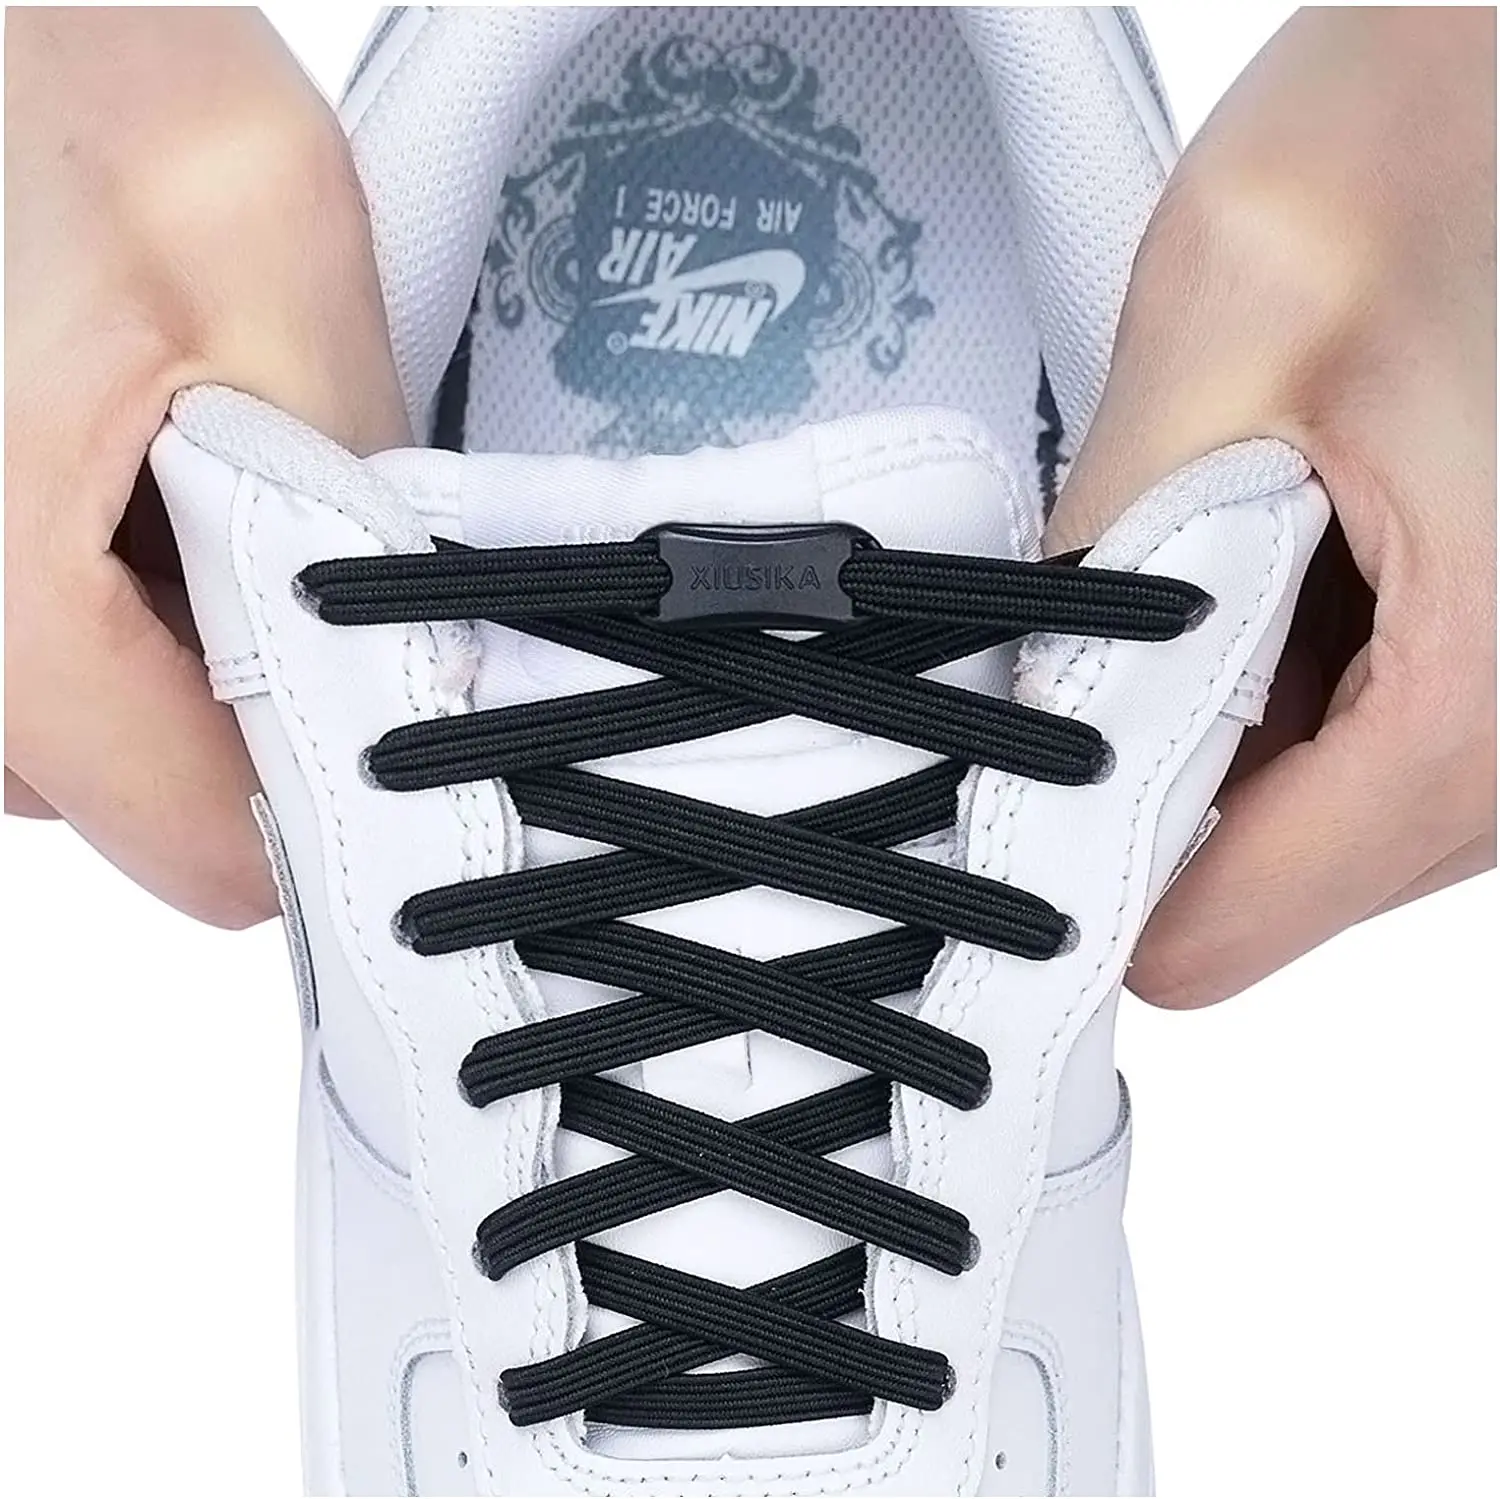 Easy No Tie Elastic Shoe Lace 100% Silicone Trainers Shoes Adult Kids Shoelaces 